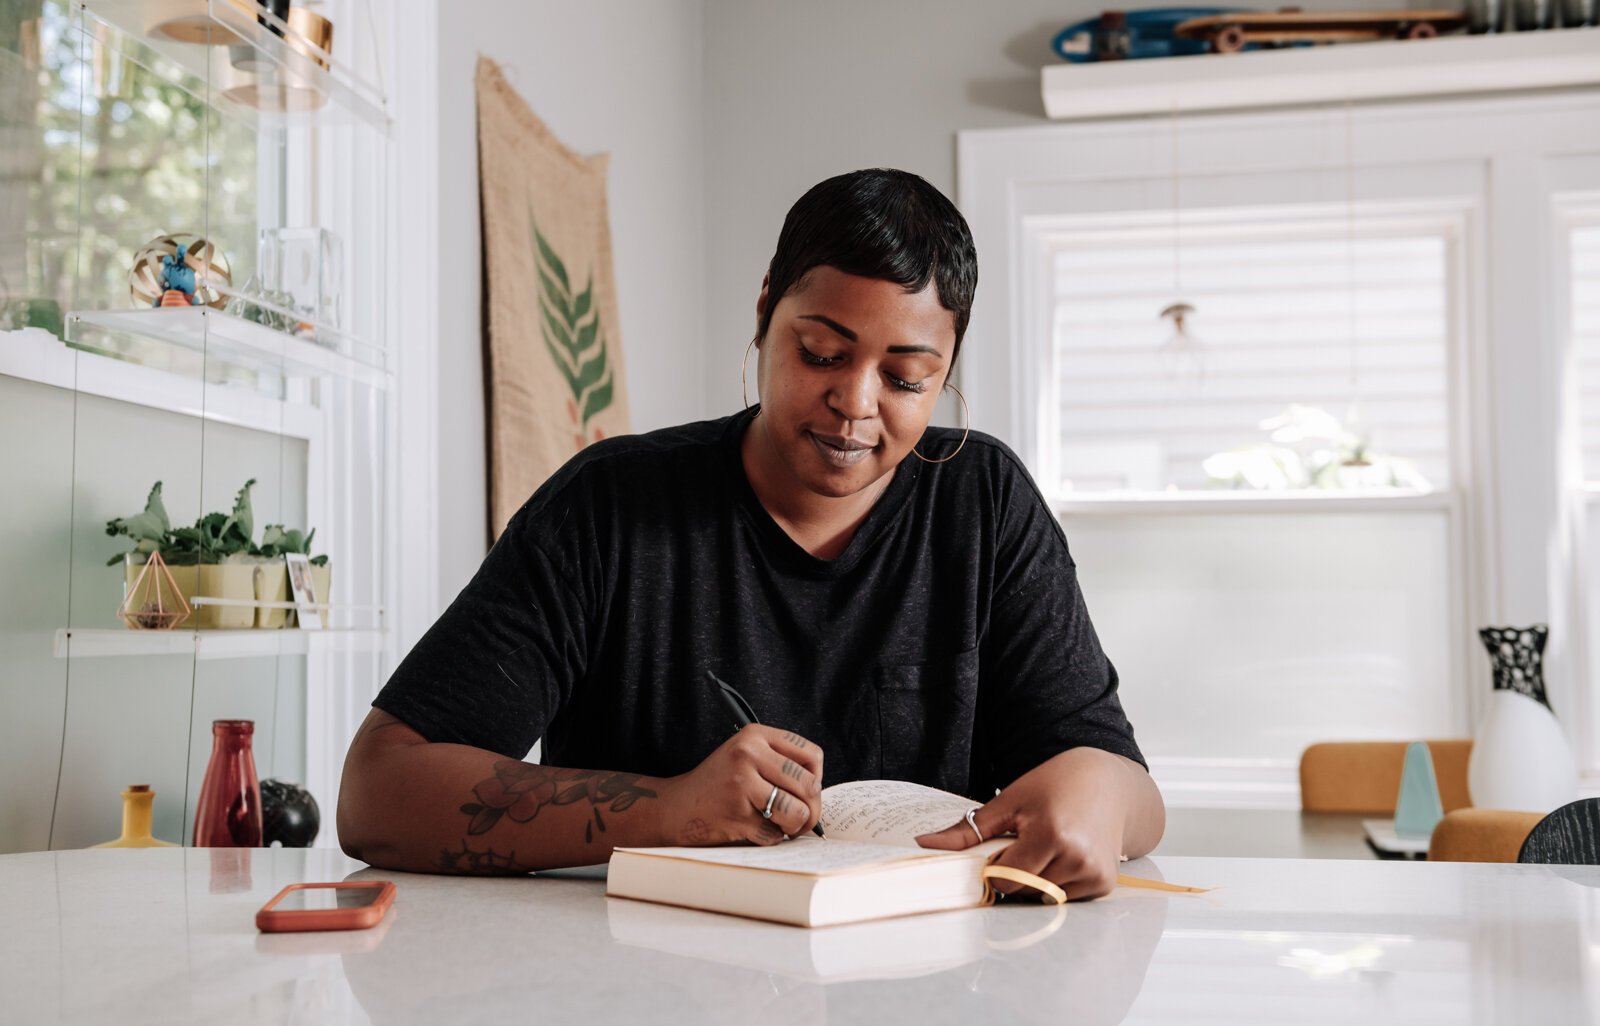 Creative Writer Shanel Turner works on writing in one of her favorite workspaces in the kitchen at her home in the '07.